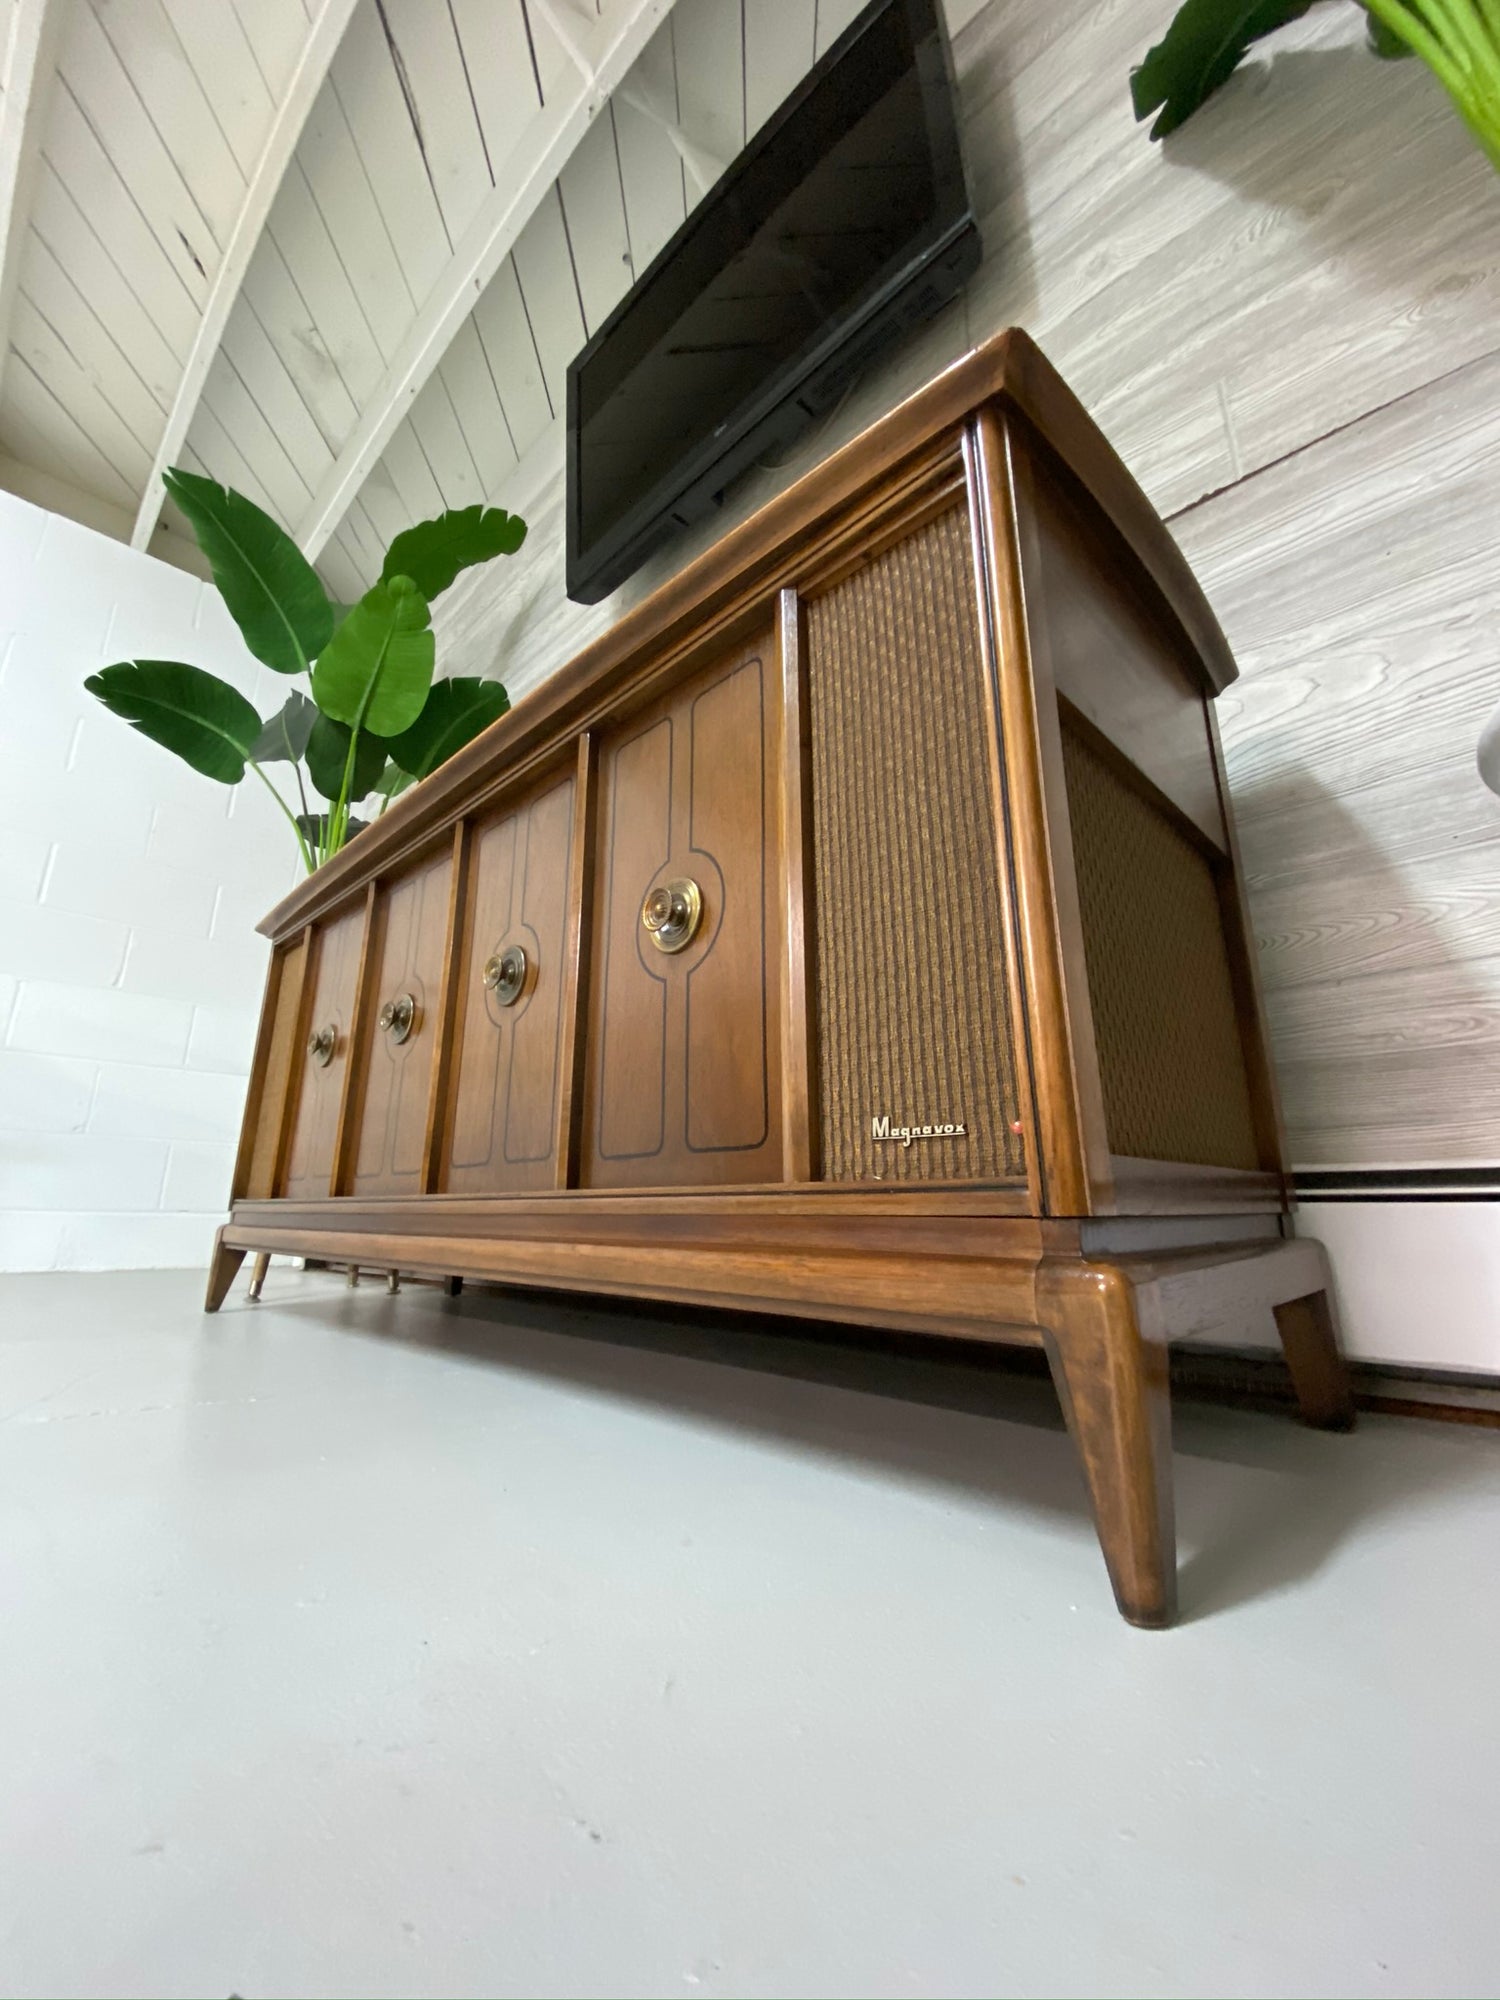 **SOLD OUT**  MAGNAVOX Vintage Stereo Console 60s Record Player Changer AM FM Bluetooth Alexa The Vintedge Co.